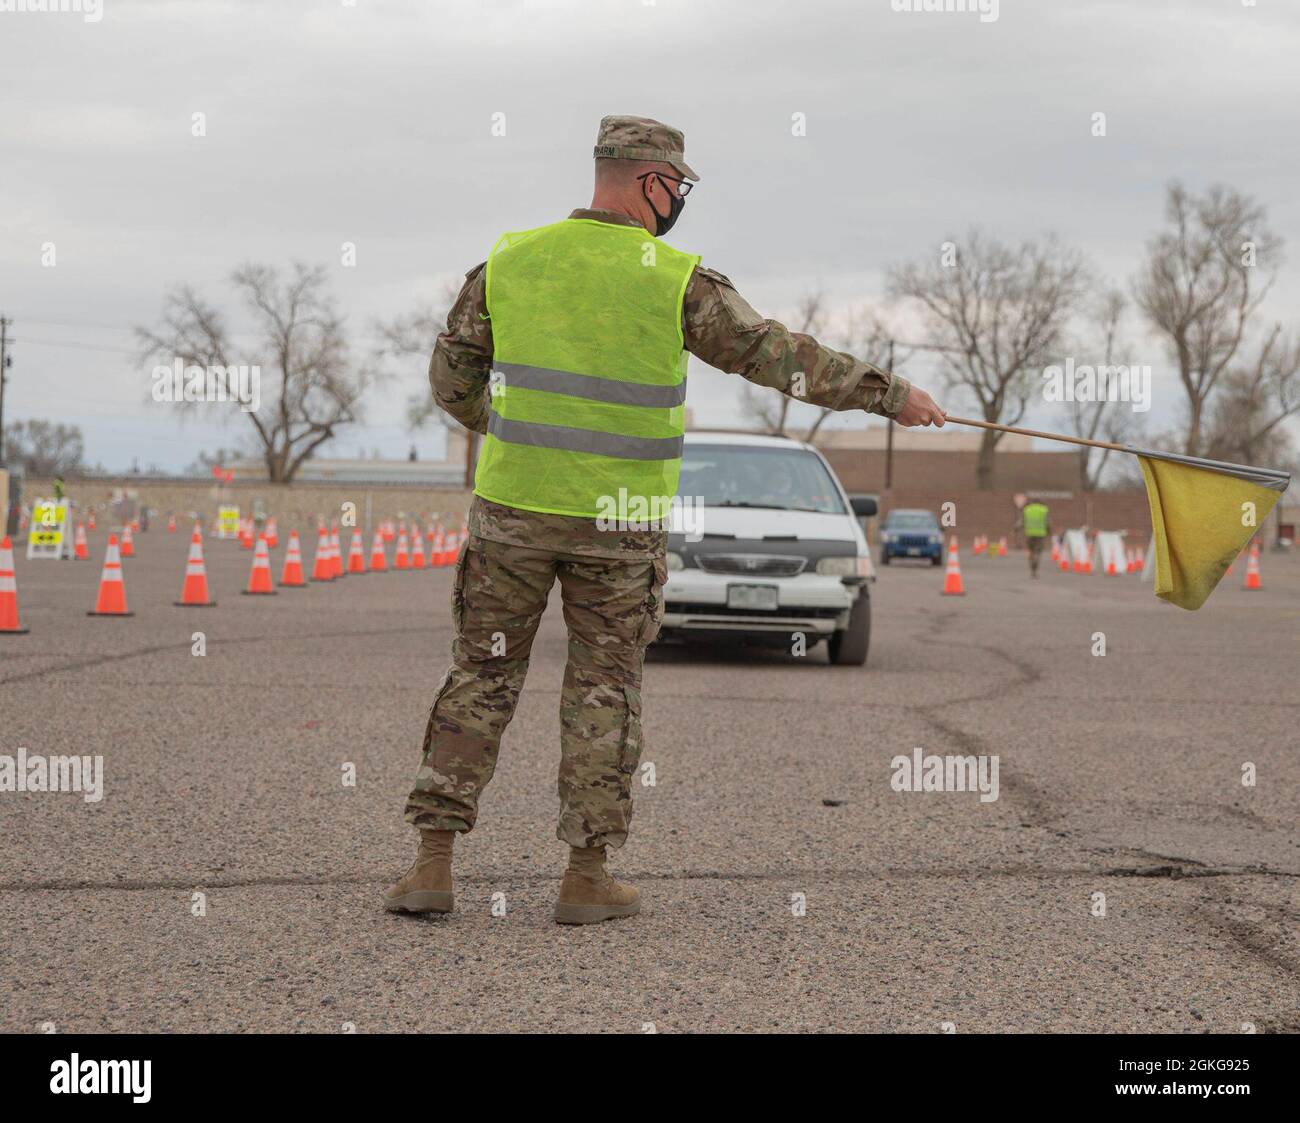 U.S. Army Pvt. Bradley Schwarm, a cavalry scout assigned to 3rd Squadron, 61st Cavalry Regiment, directs a community member to a vaccination lane in Pueblo, Colorado, April 15, 2021. The Soldiers deployed from Fort Carson, Colorado, to administer vaccinations to members of the Pueblo community. U.S. Northern Command, through U.S. Army North, remains committed to providing continued, flexible Department of Defense support to the Federal Emergency Management Agency as part of the whole-of-government response to COVID-19. Stock Photo